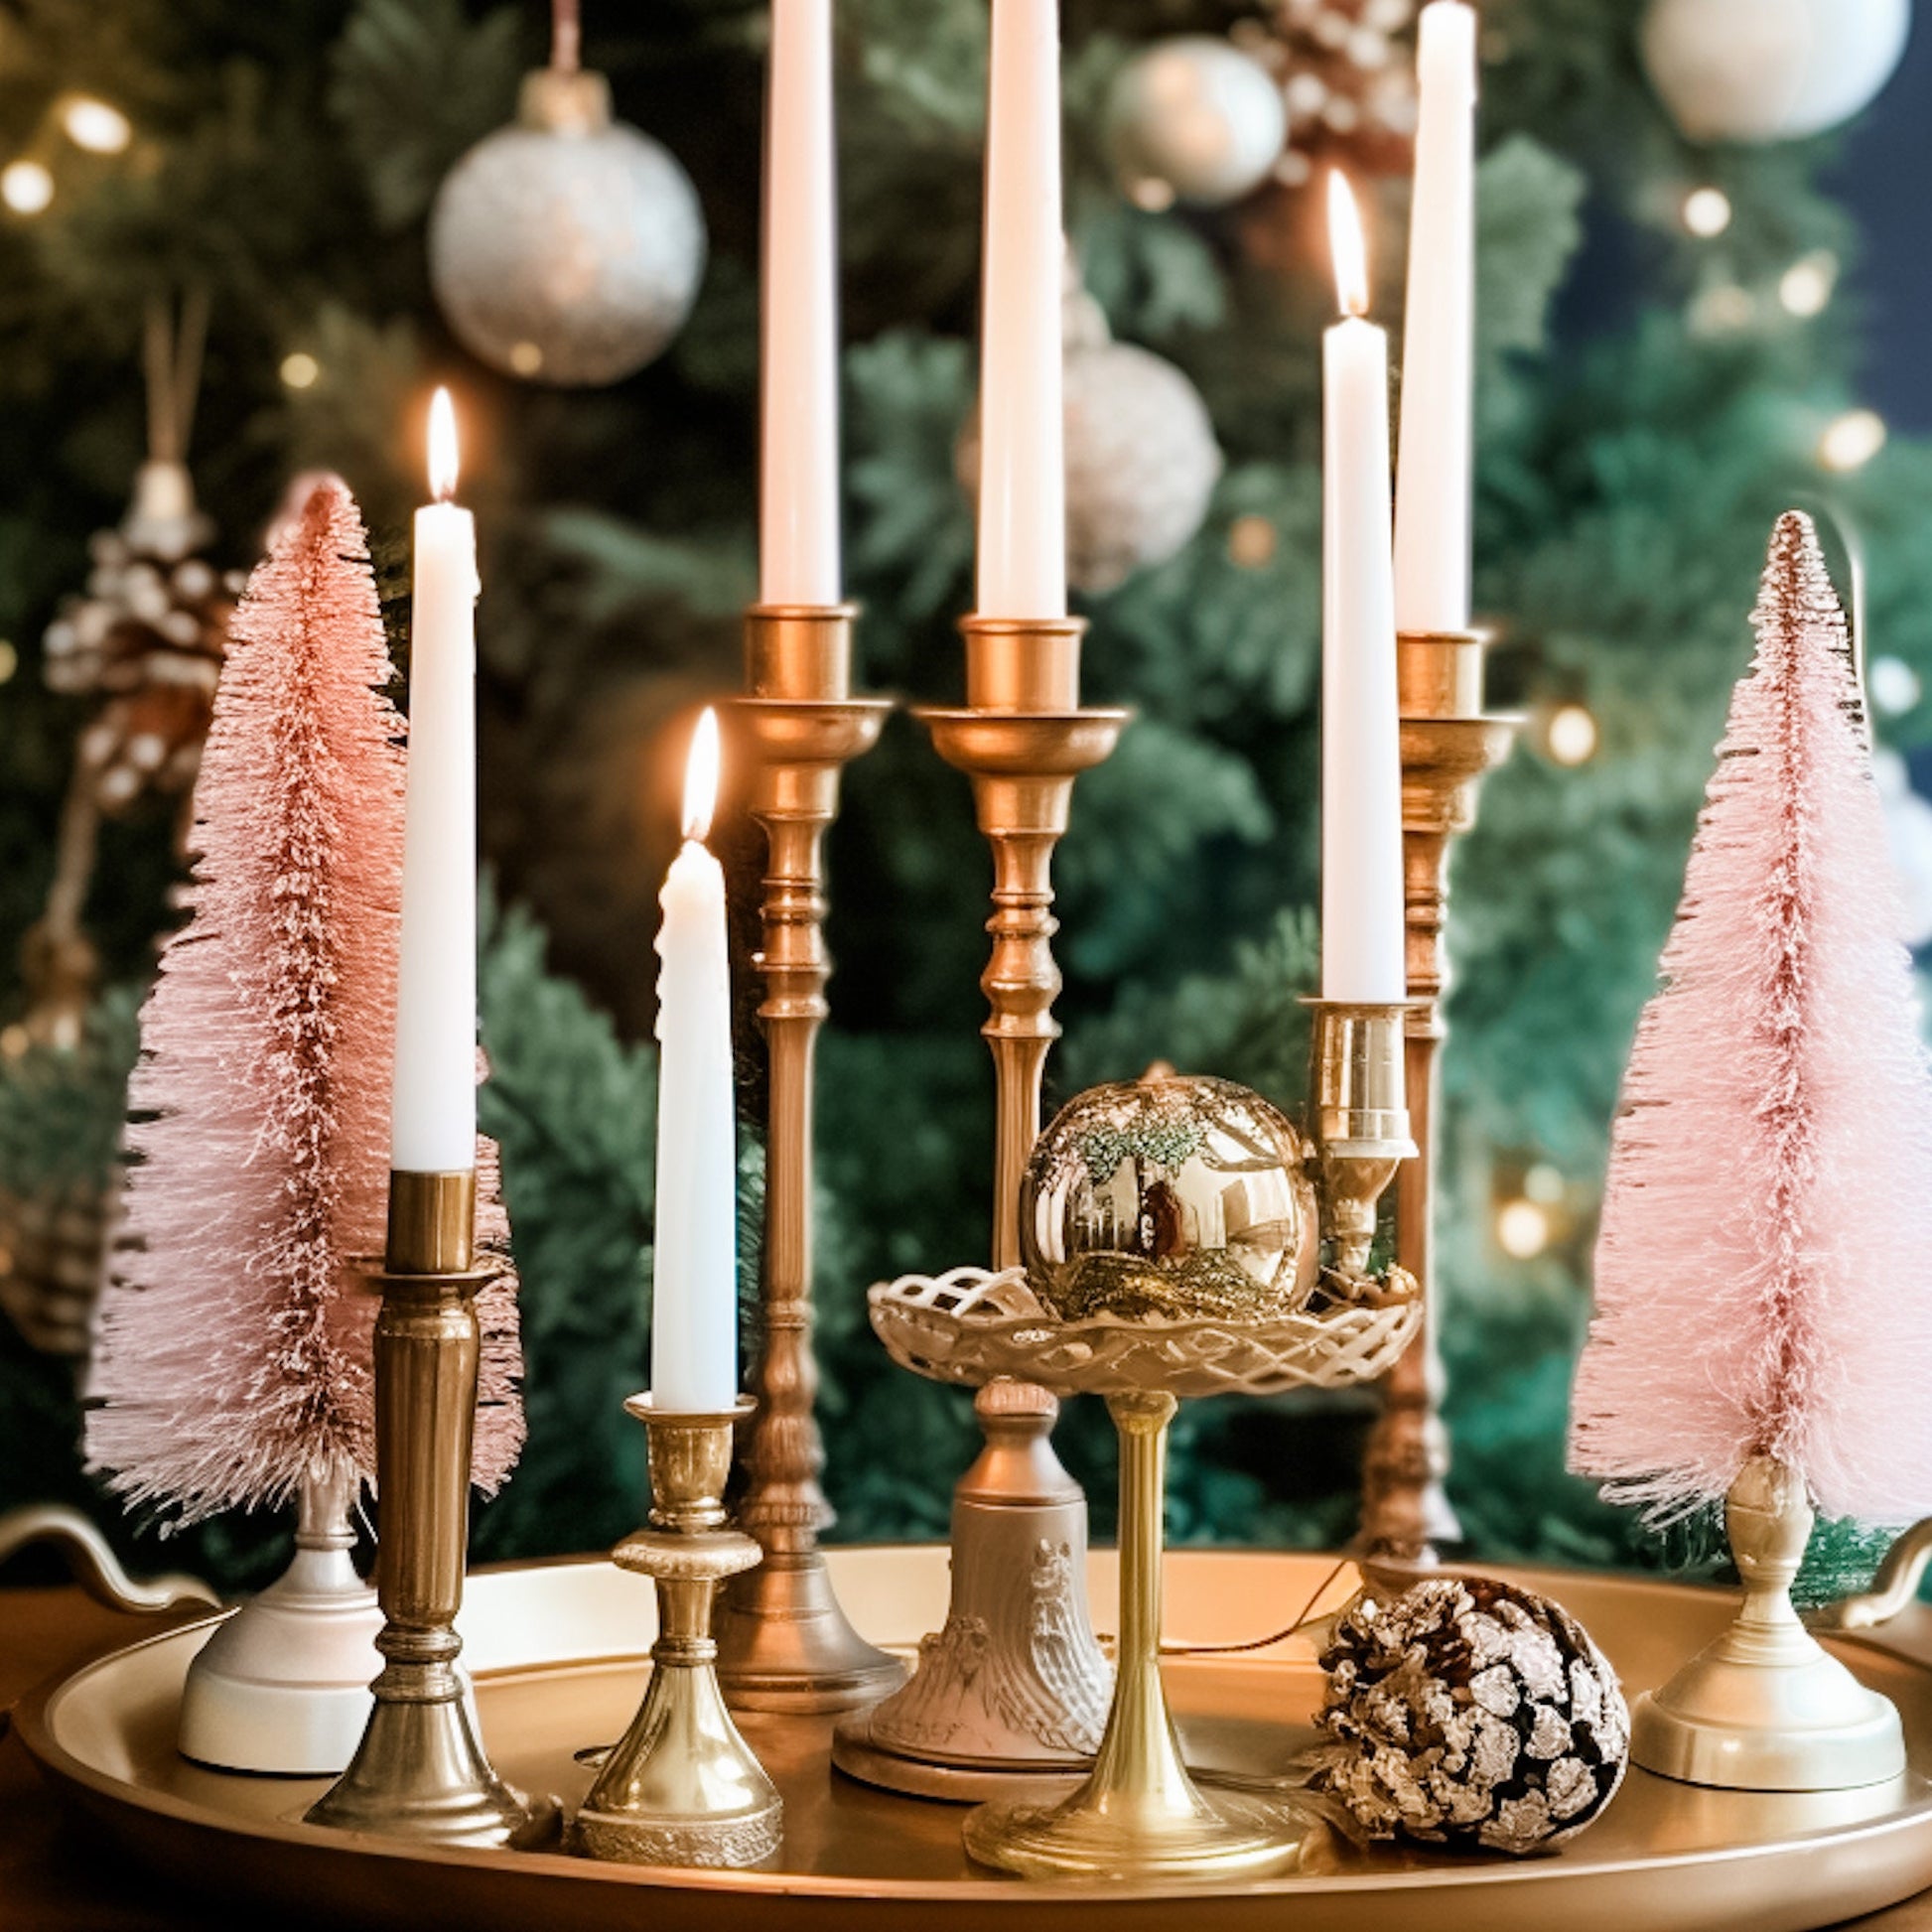 Eclectic Vintage Brass Candlestick Collection | Mismatched Sets for Holiday Decor